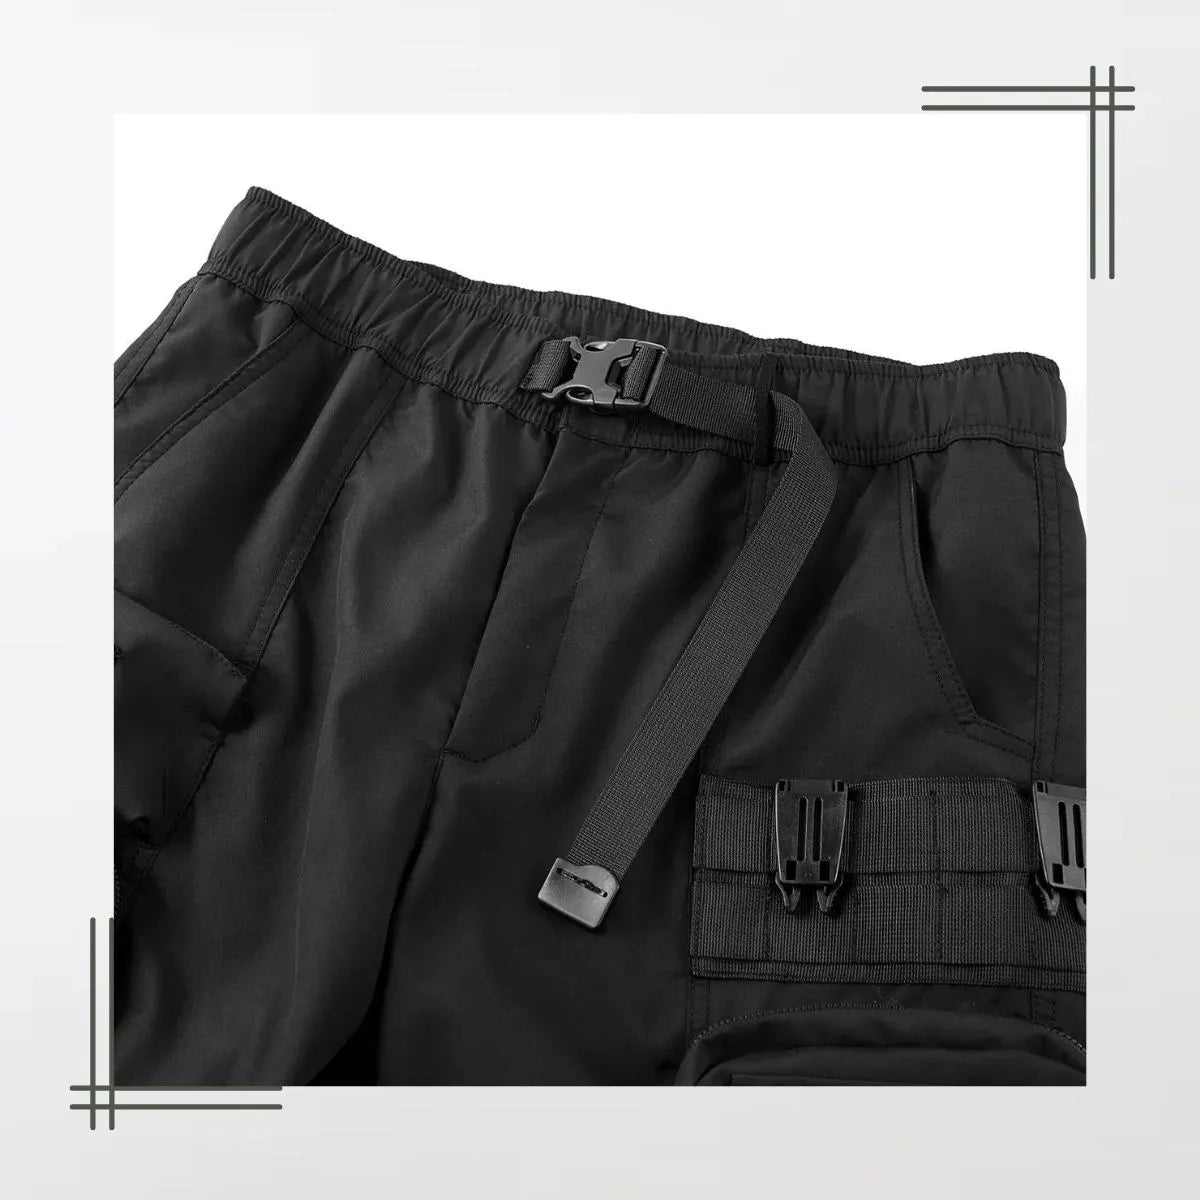 The Black S/23 Functional Multi Pocket Shorts By Clotechnow